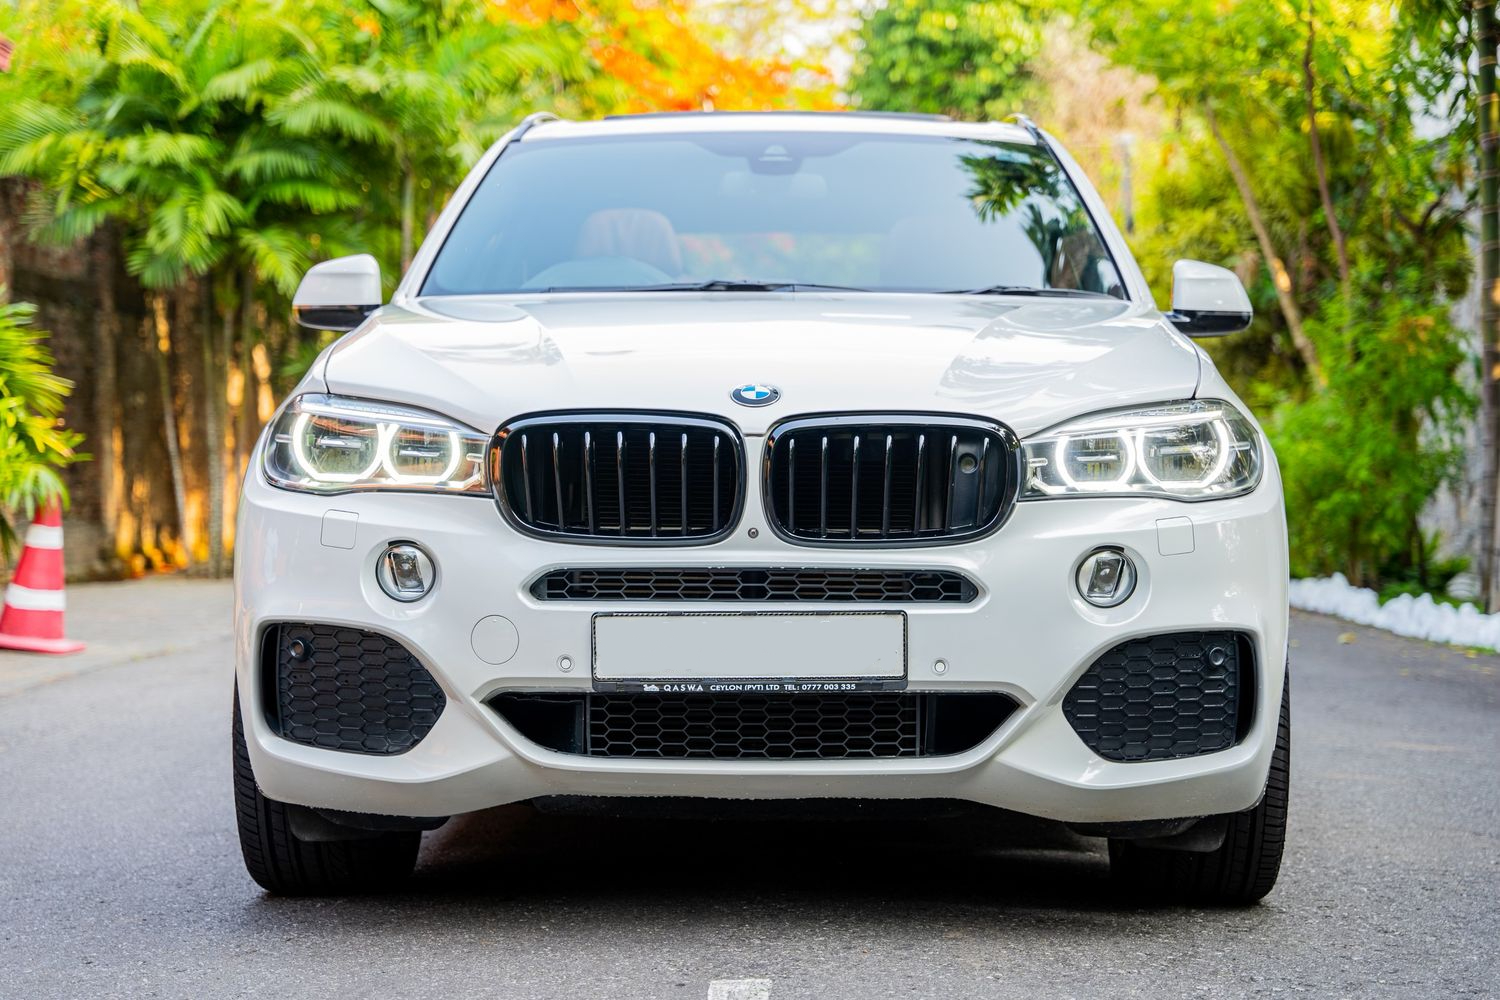 BMW X5 front view